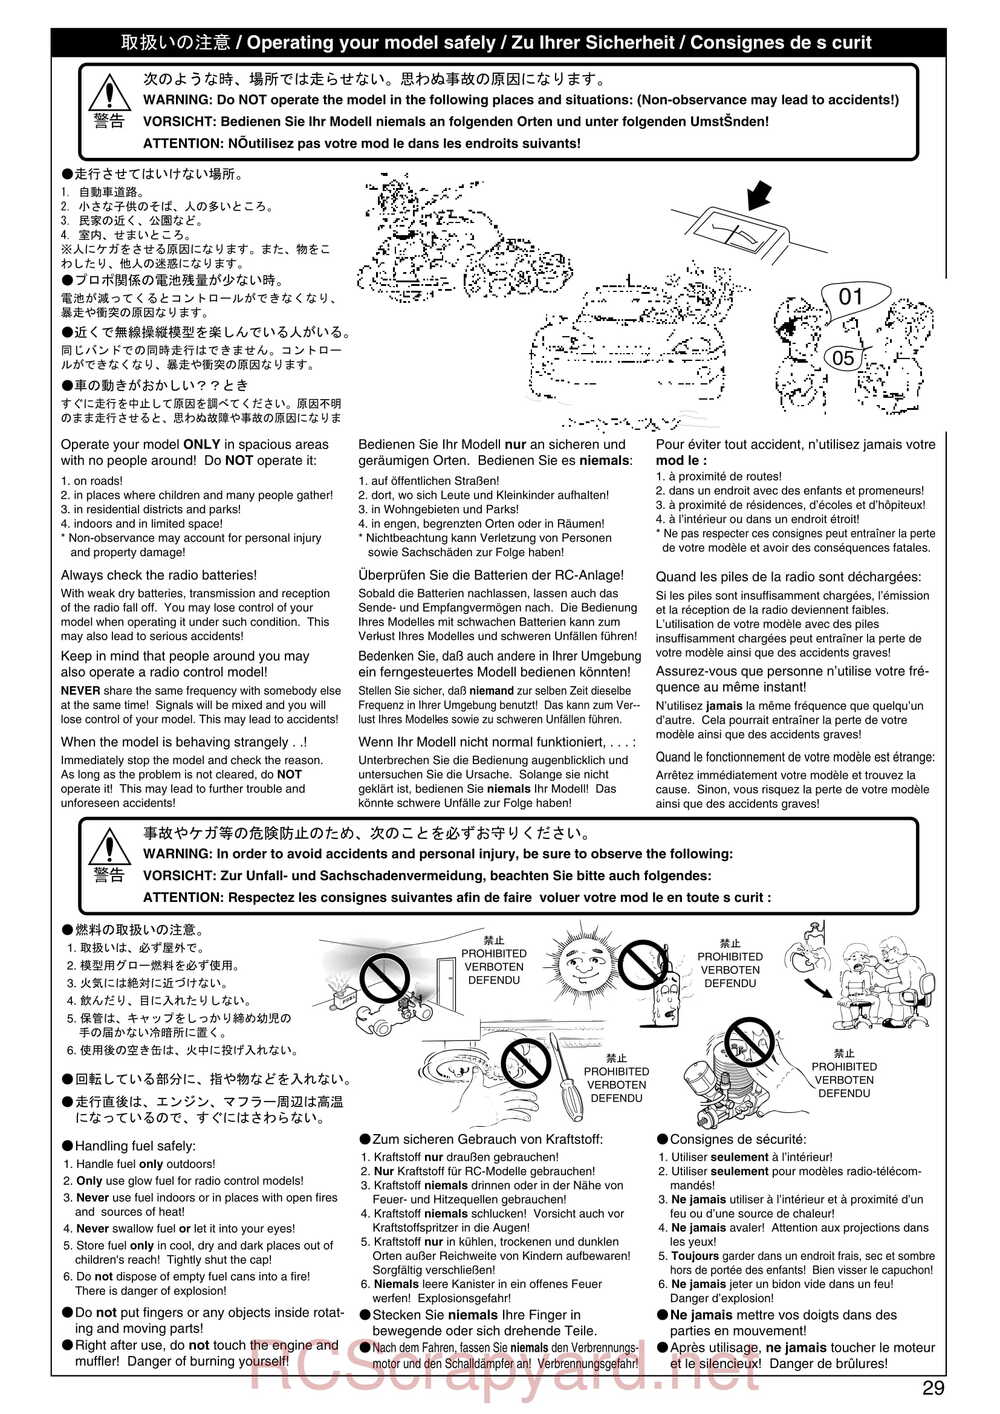 Kyosho - 31241 - V-One-S - Manual - Page 29